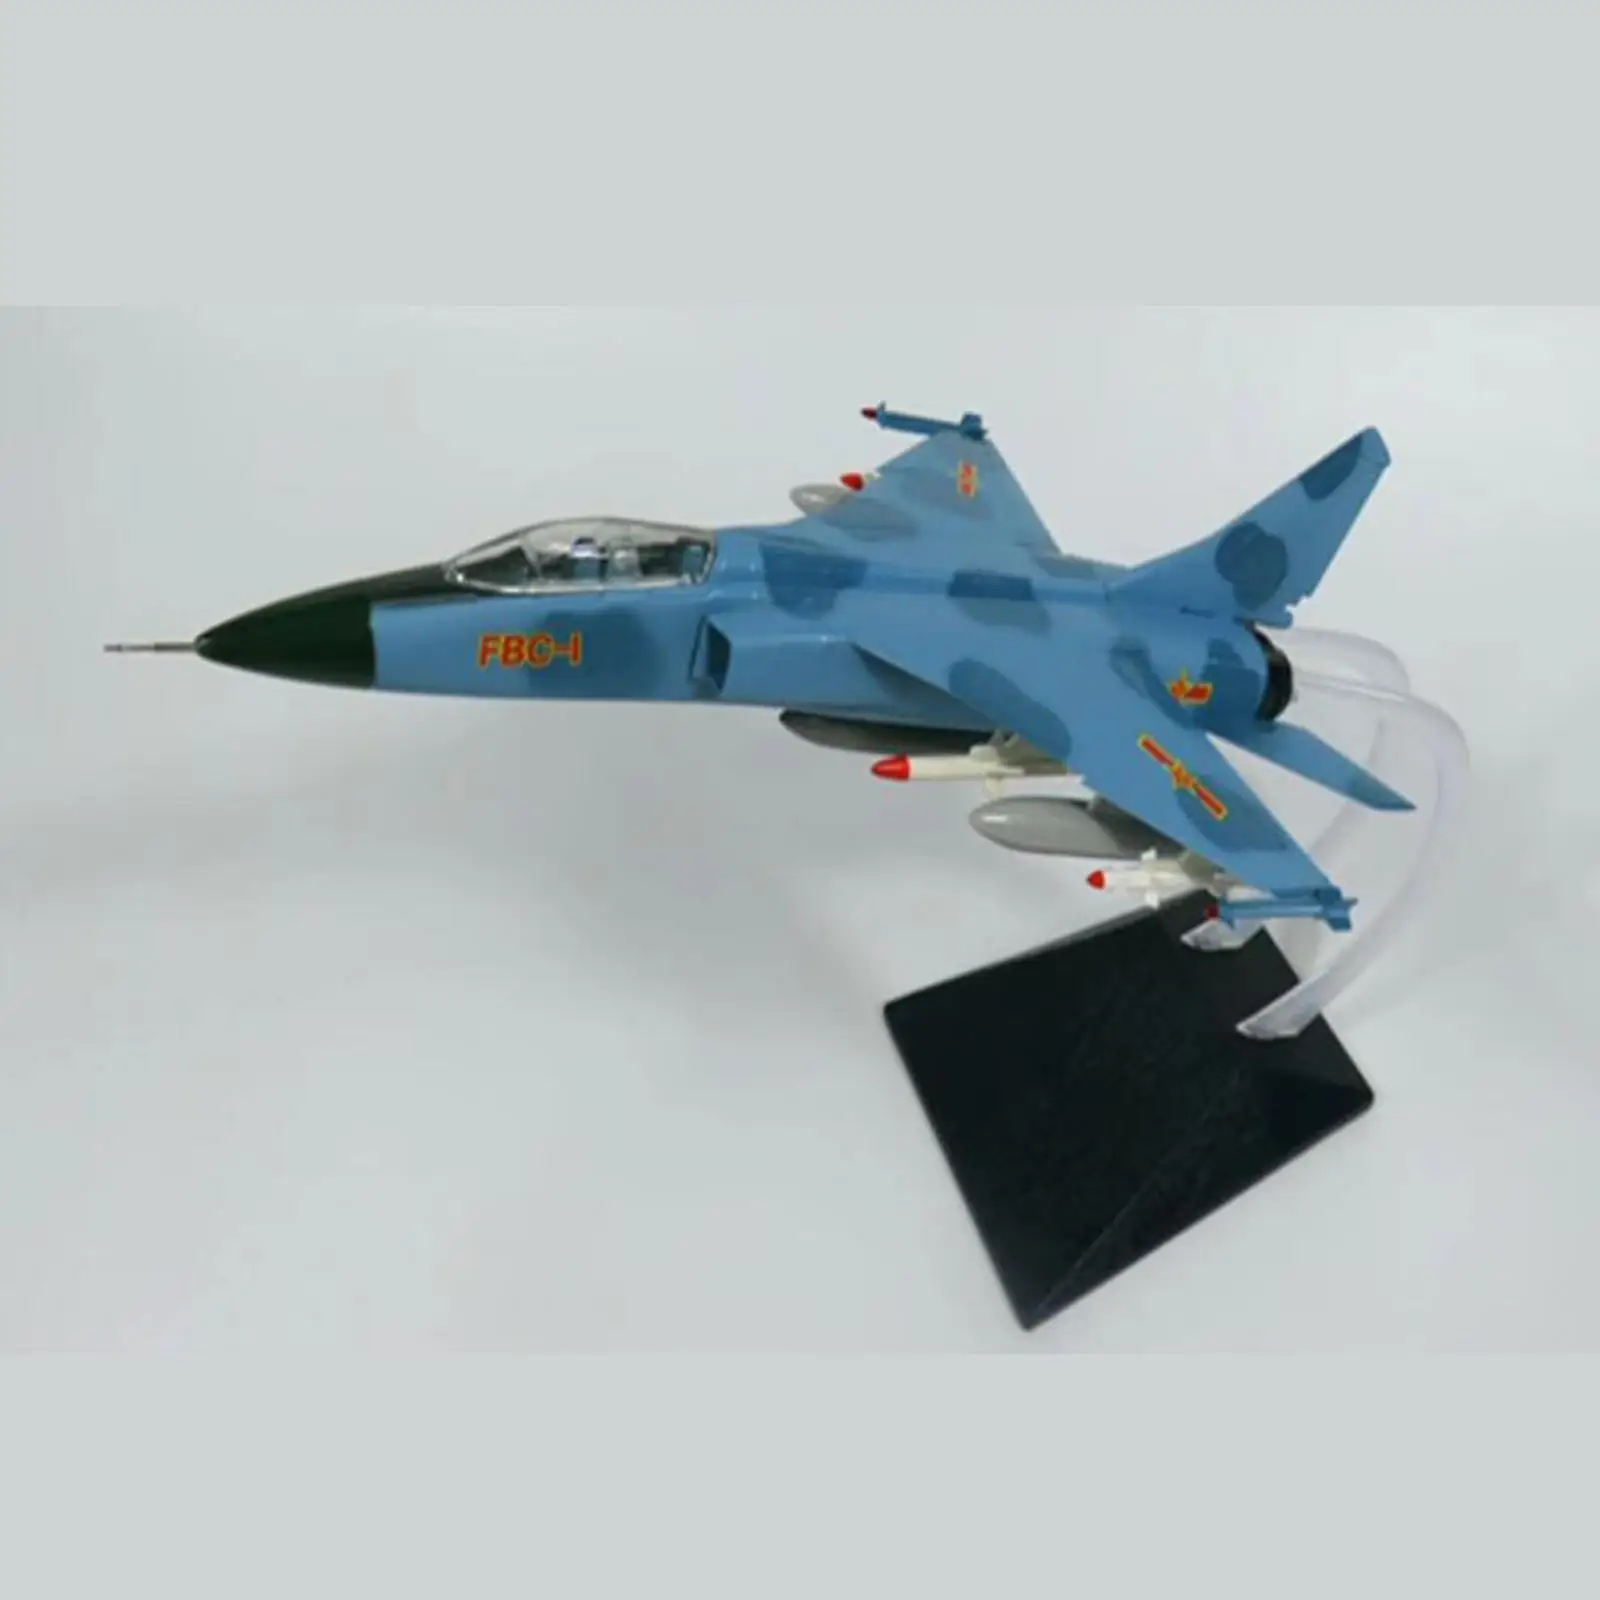 1:72 Model Airplane Display Model Plane Miniature Model Playset 1:72 Scale Airplane Model for Children Boys Adults Holiday Gifts